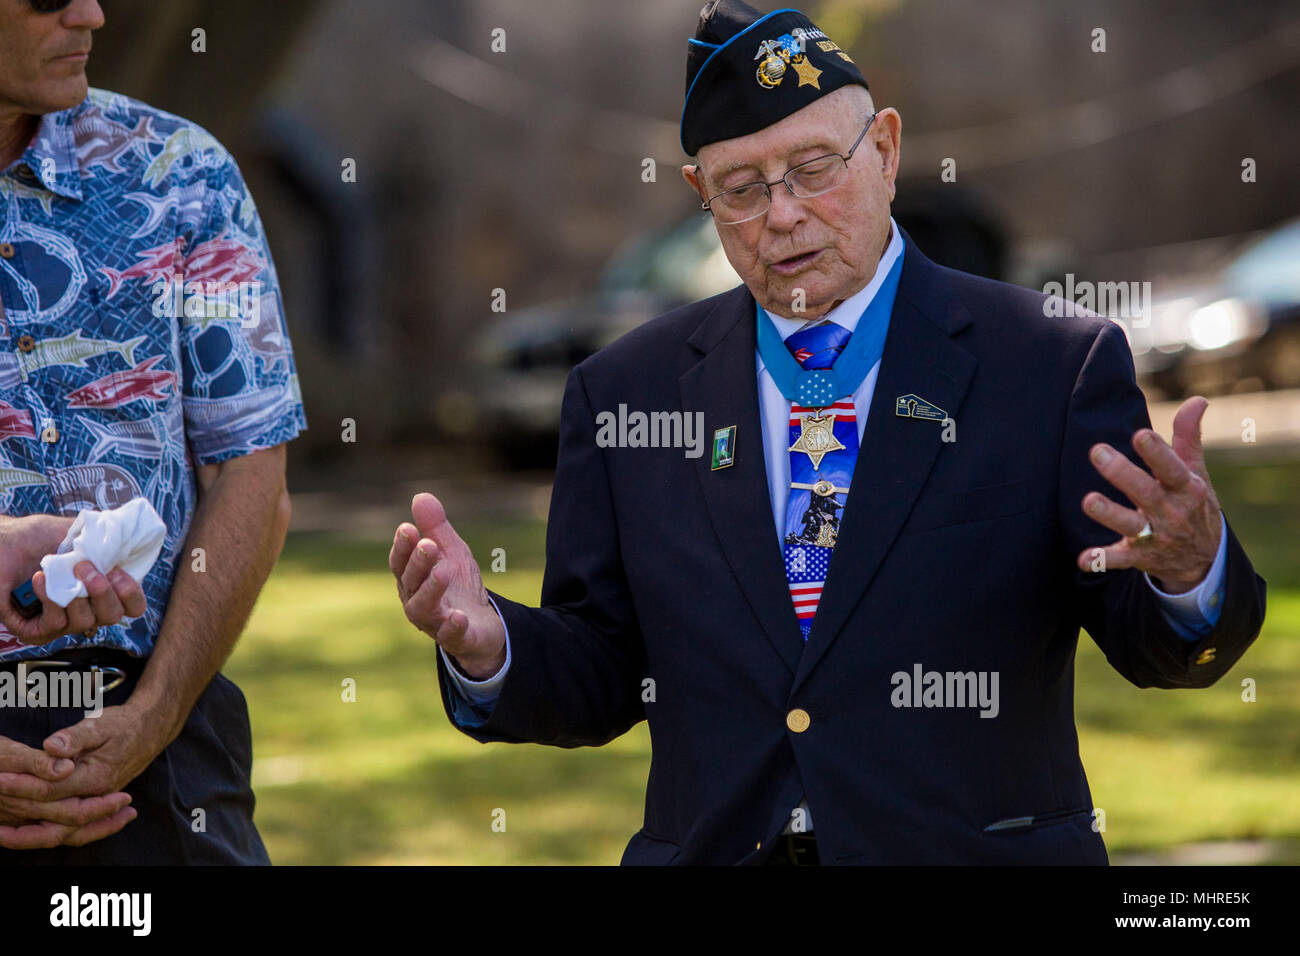 U.S. Marine Corps Chief Warrant Officer 4 Hershel 'Woody' Williams (Ret.) describes a portion of the war and what took place on Iwo Jima at the National Memorial Cemetary of the Pacific, Honolulu HI, March 17, 2018. Williams traveled to Oahu to participate in various events and visit the graves of World War II veterans that made the ultimate sacrifice. (U.S. Marine Corps Stock Photo